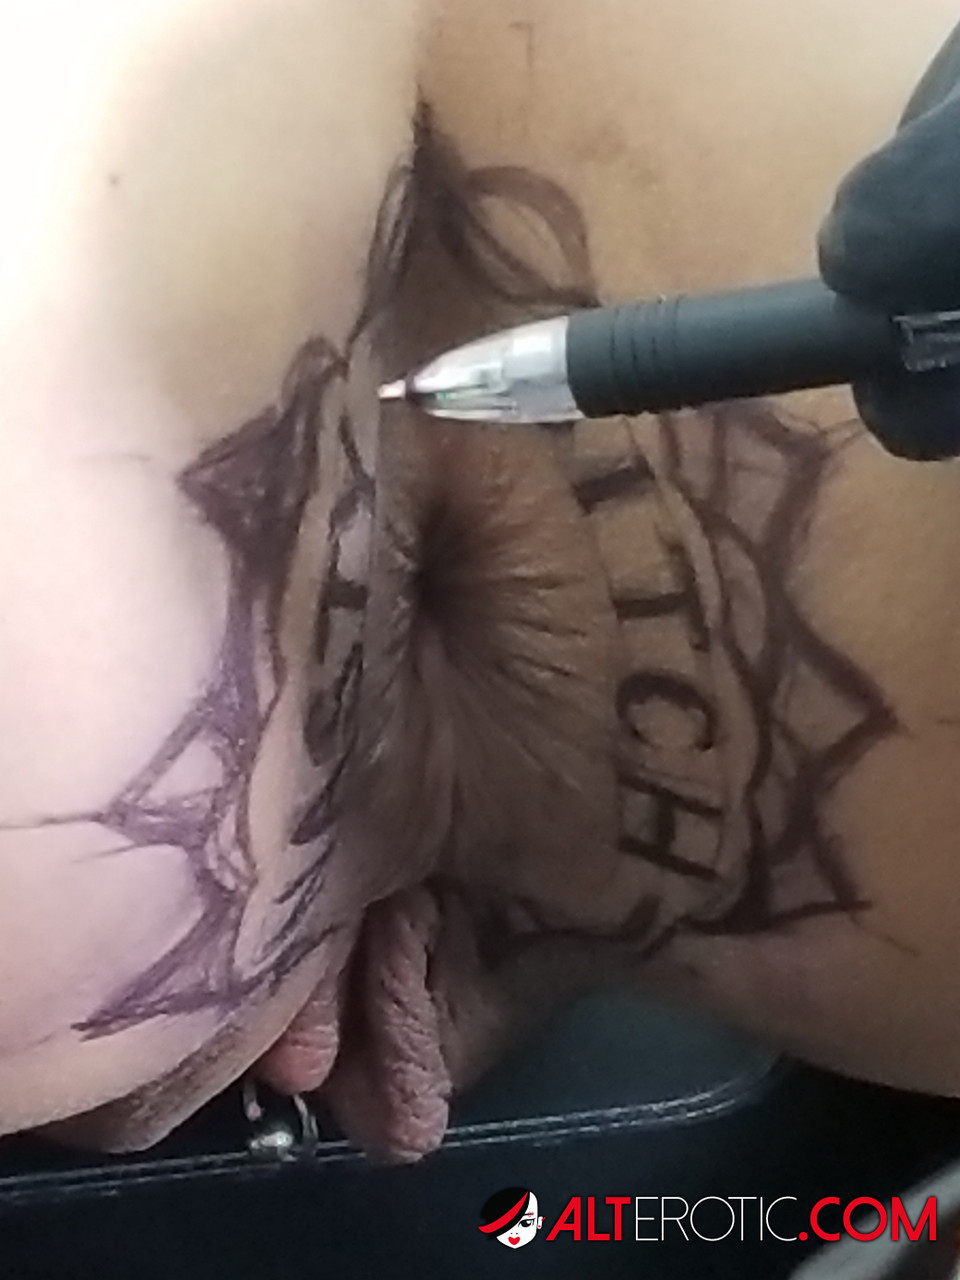 Latina chick Kitty Jaguar gets a butt tattoo before being fucked porno fotky #424168451 | Alt Erotic Pics, Kitty Jaguar, Tattoo, mobilní porno